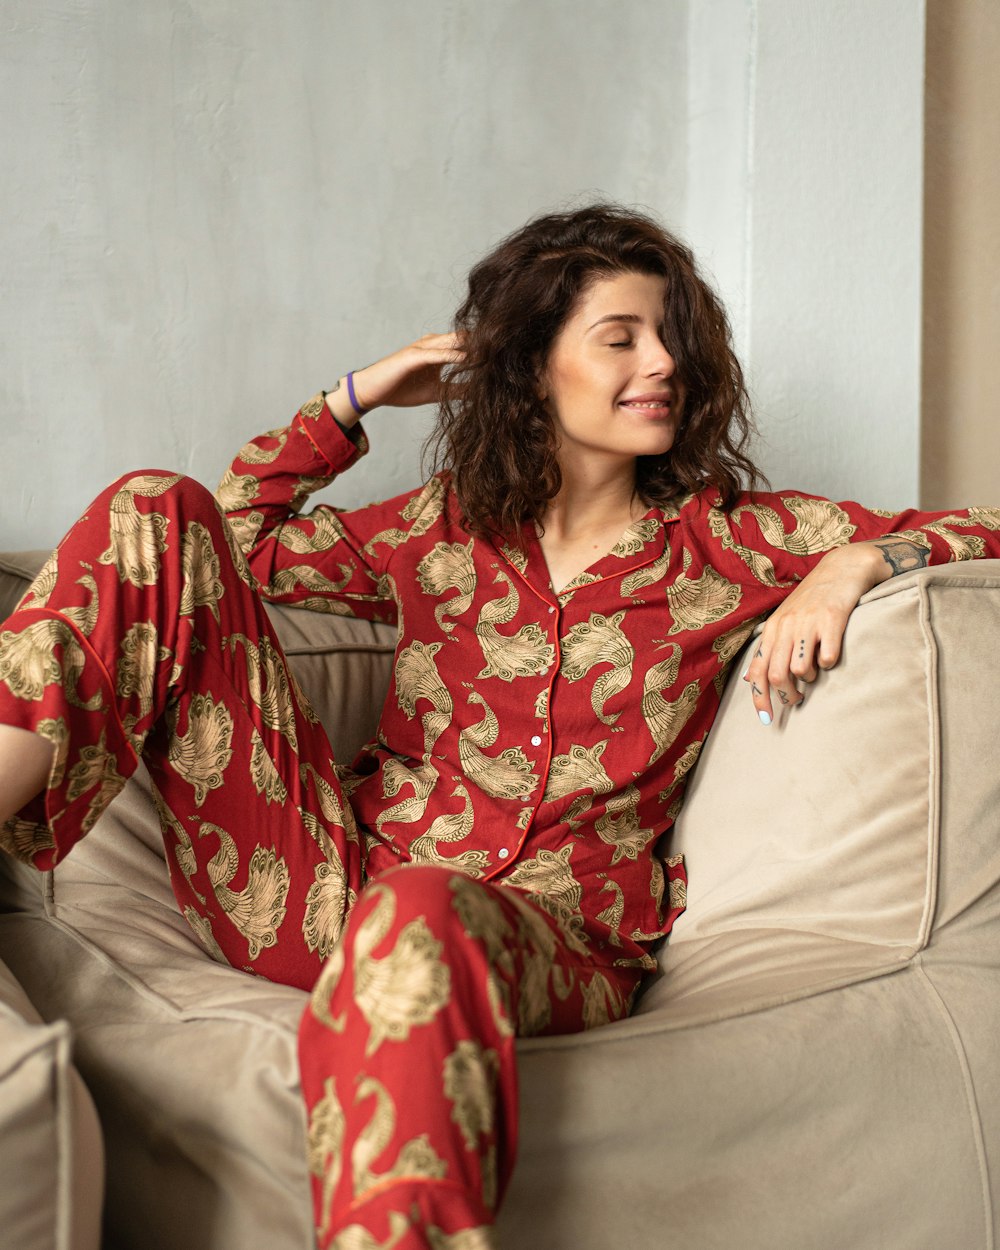 a woman sitting on a couch wearing a red and gold pajamas